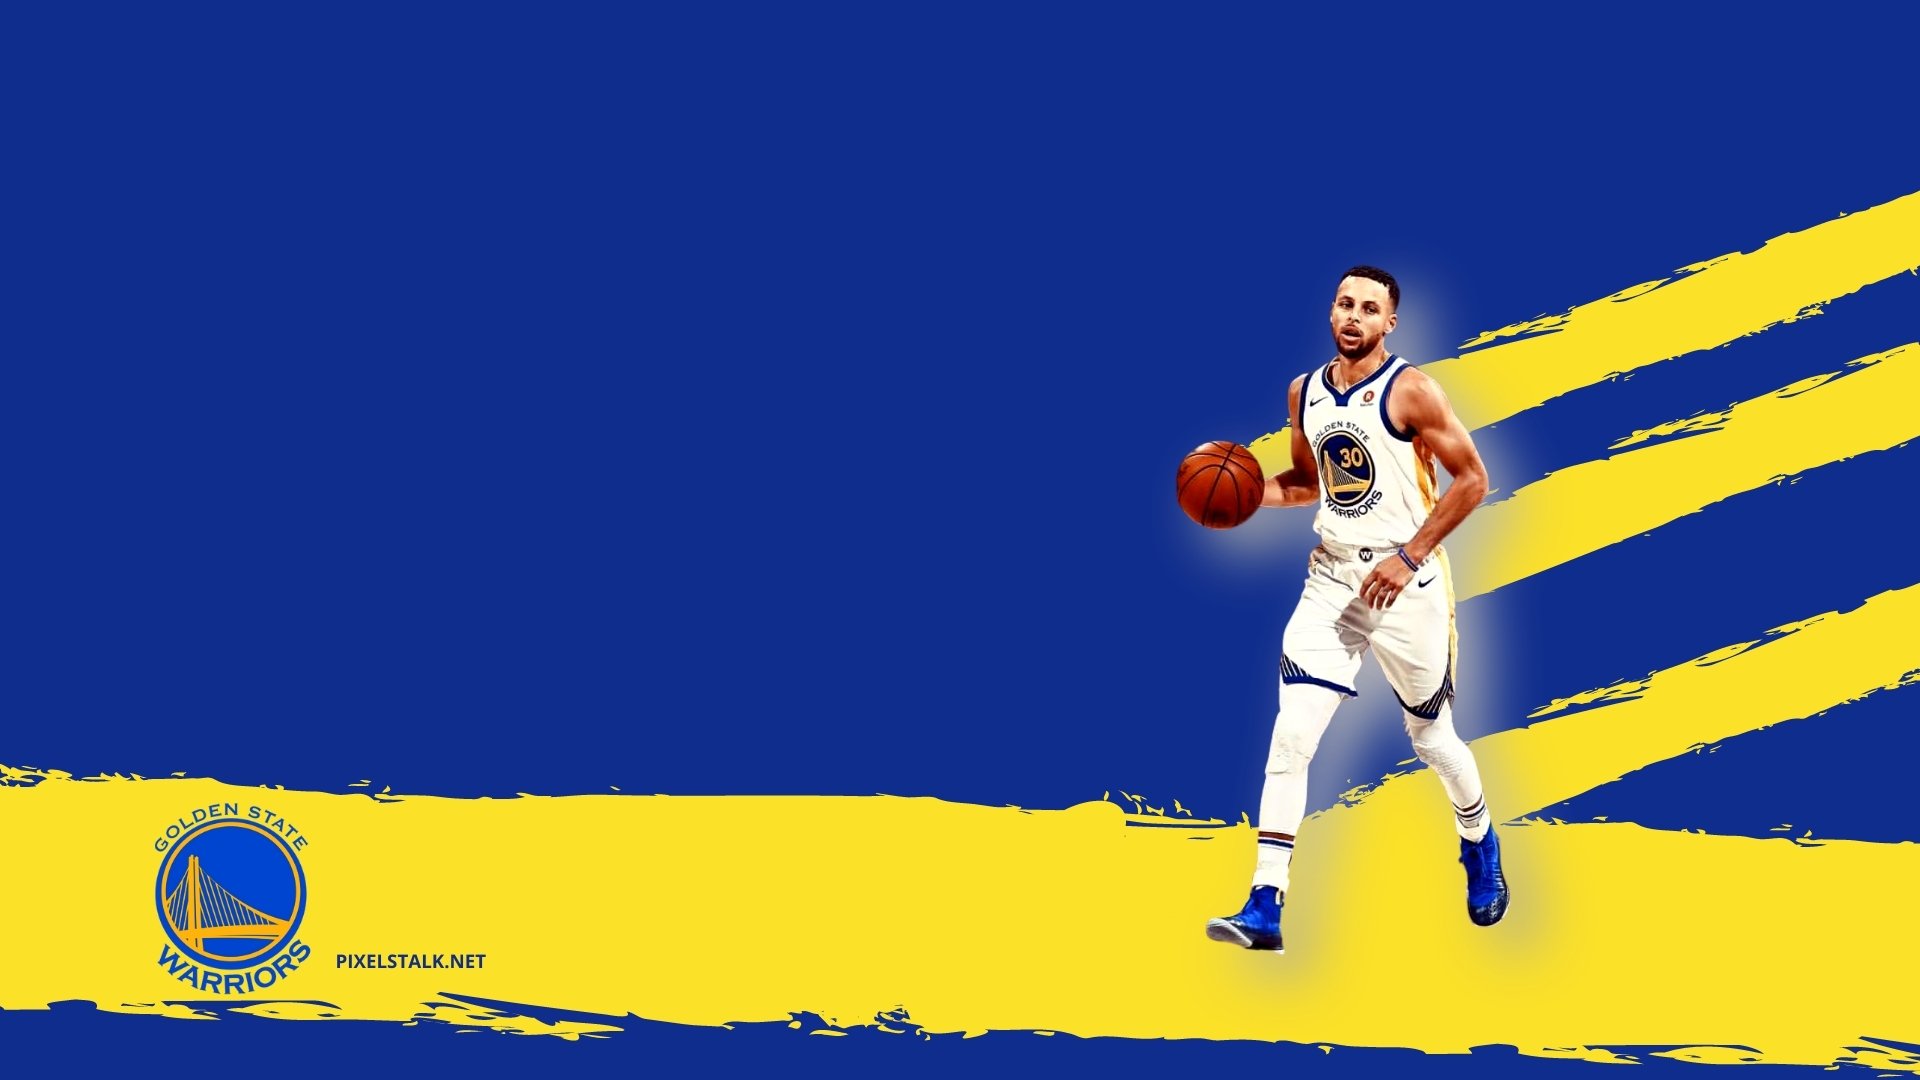 Stethen Curry 2022 Wallpapers - Wallpaper Cave